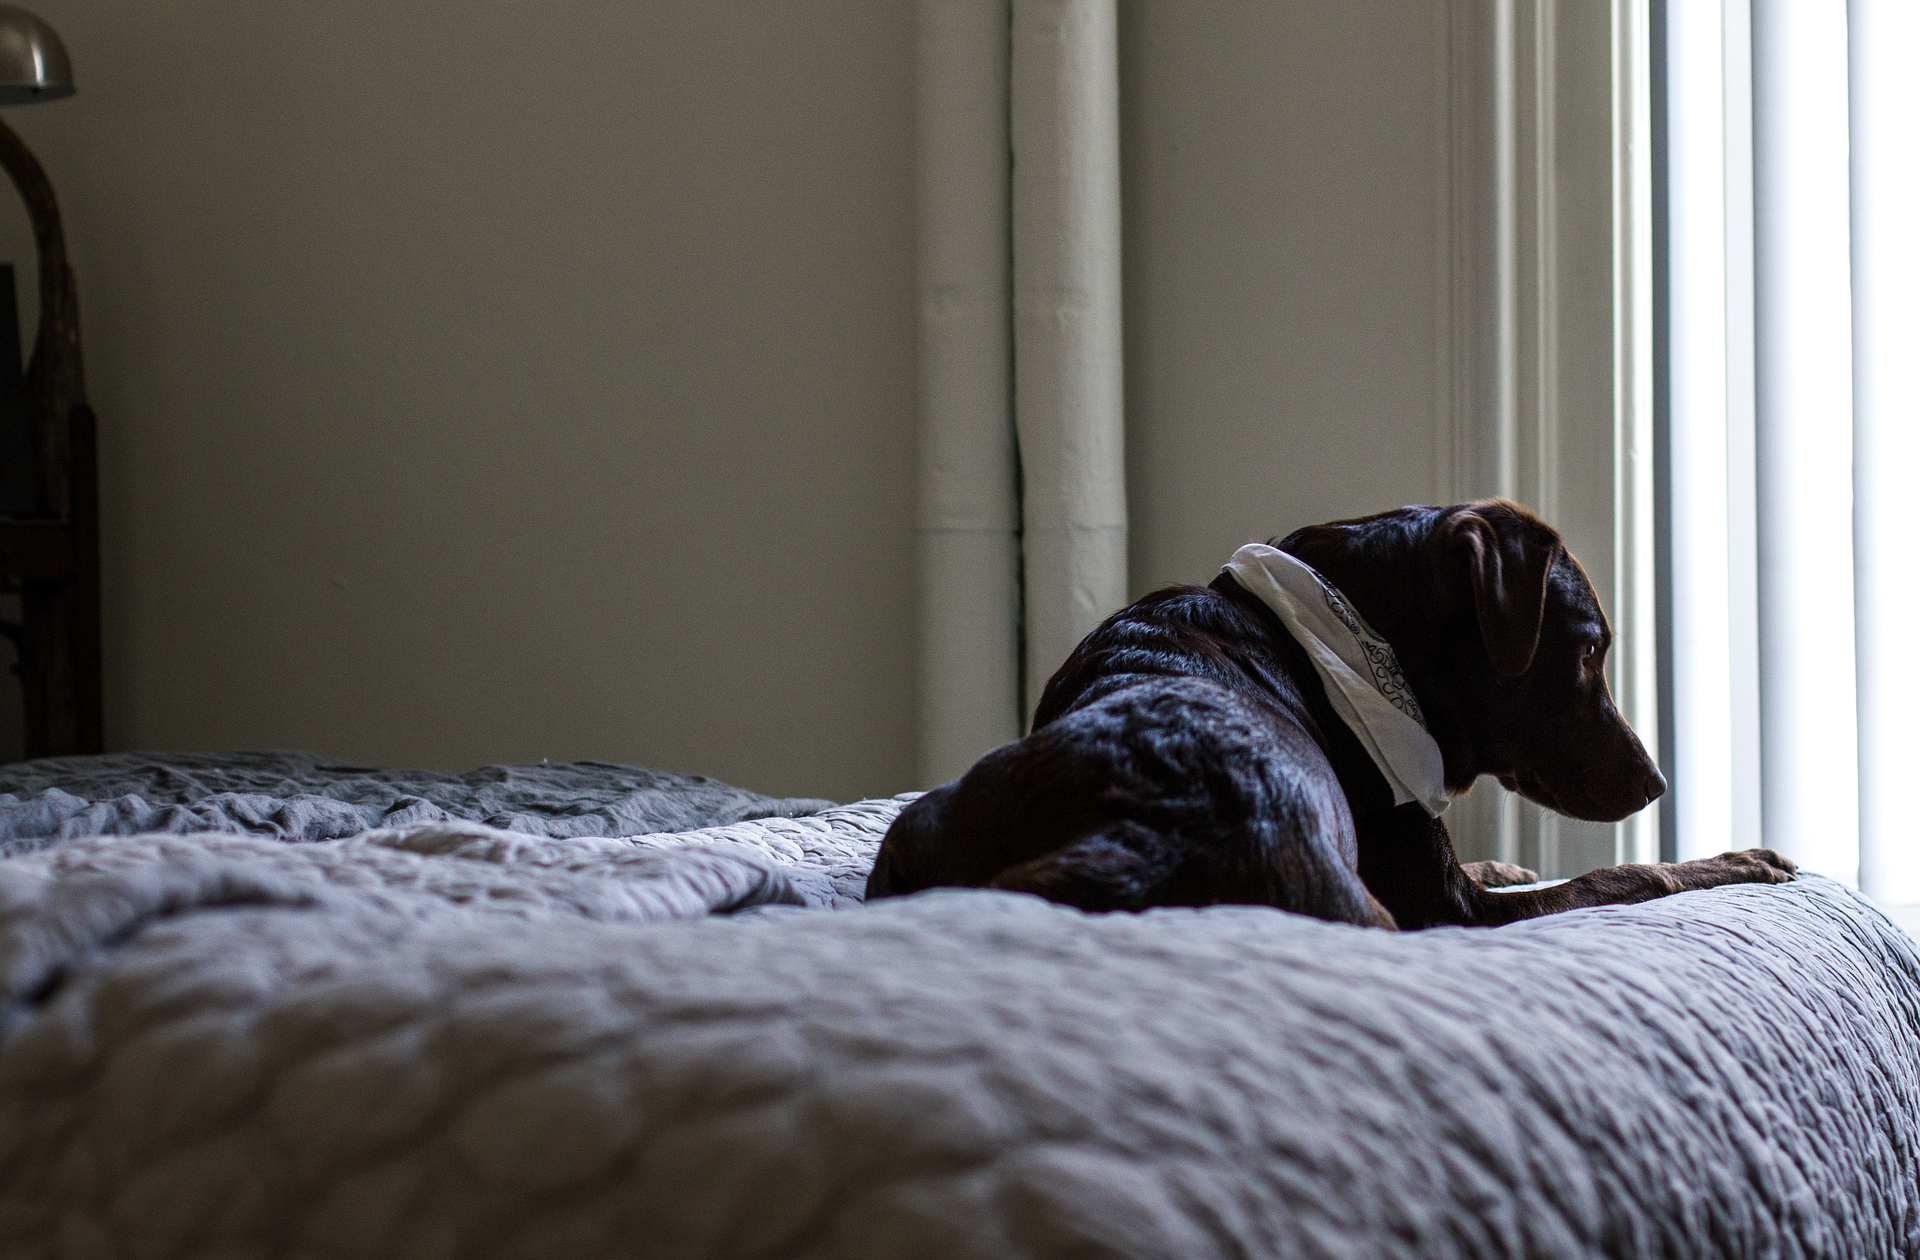 Why do dogs pee on the bed?